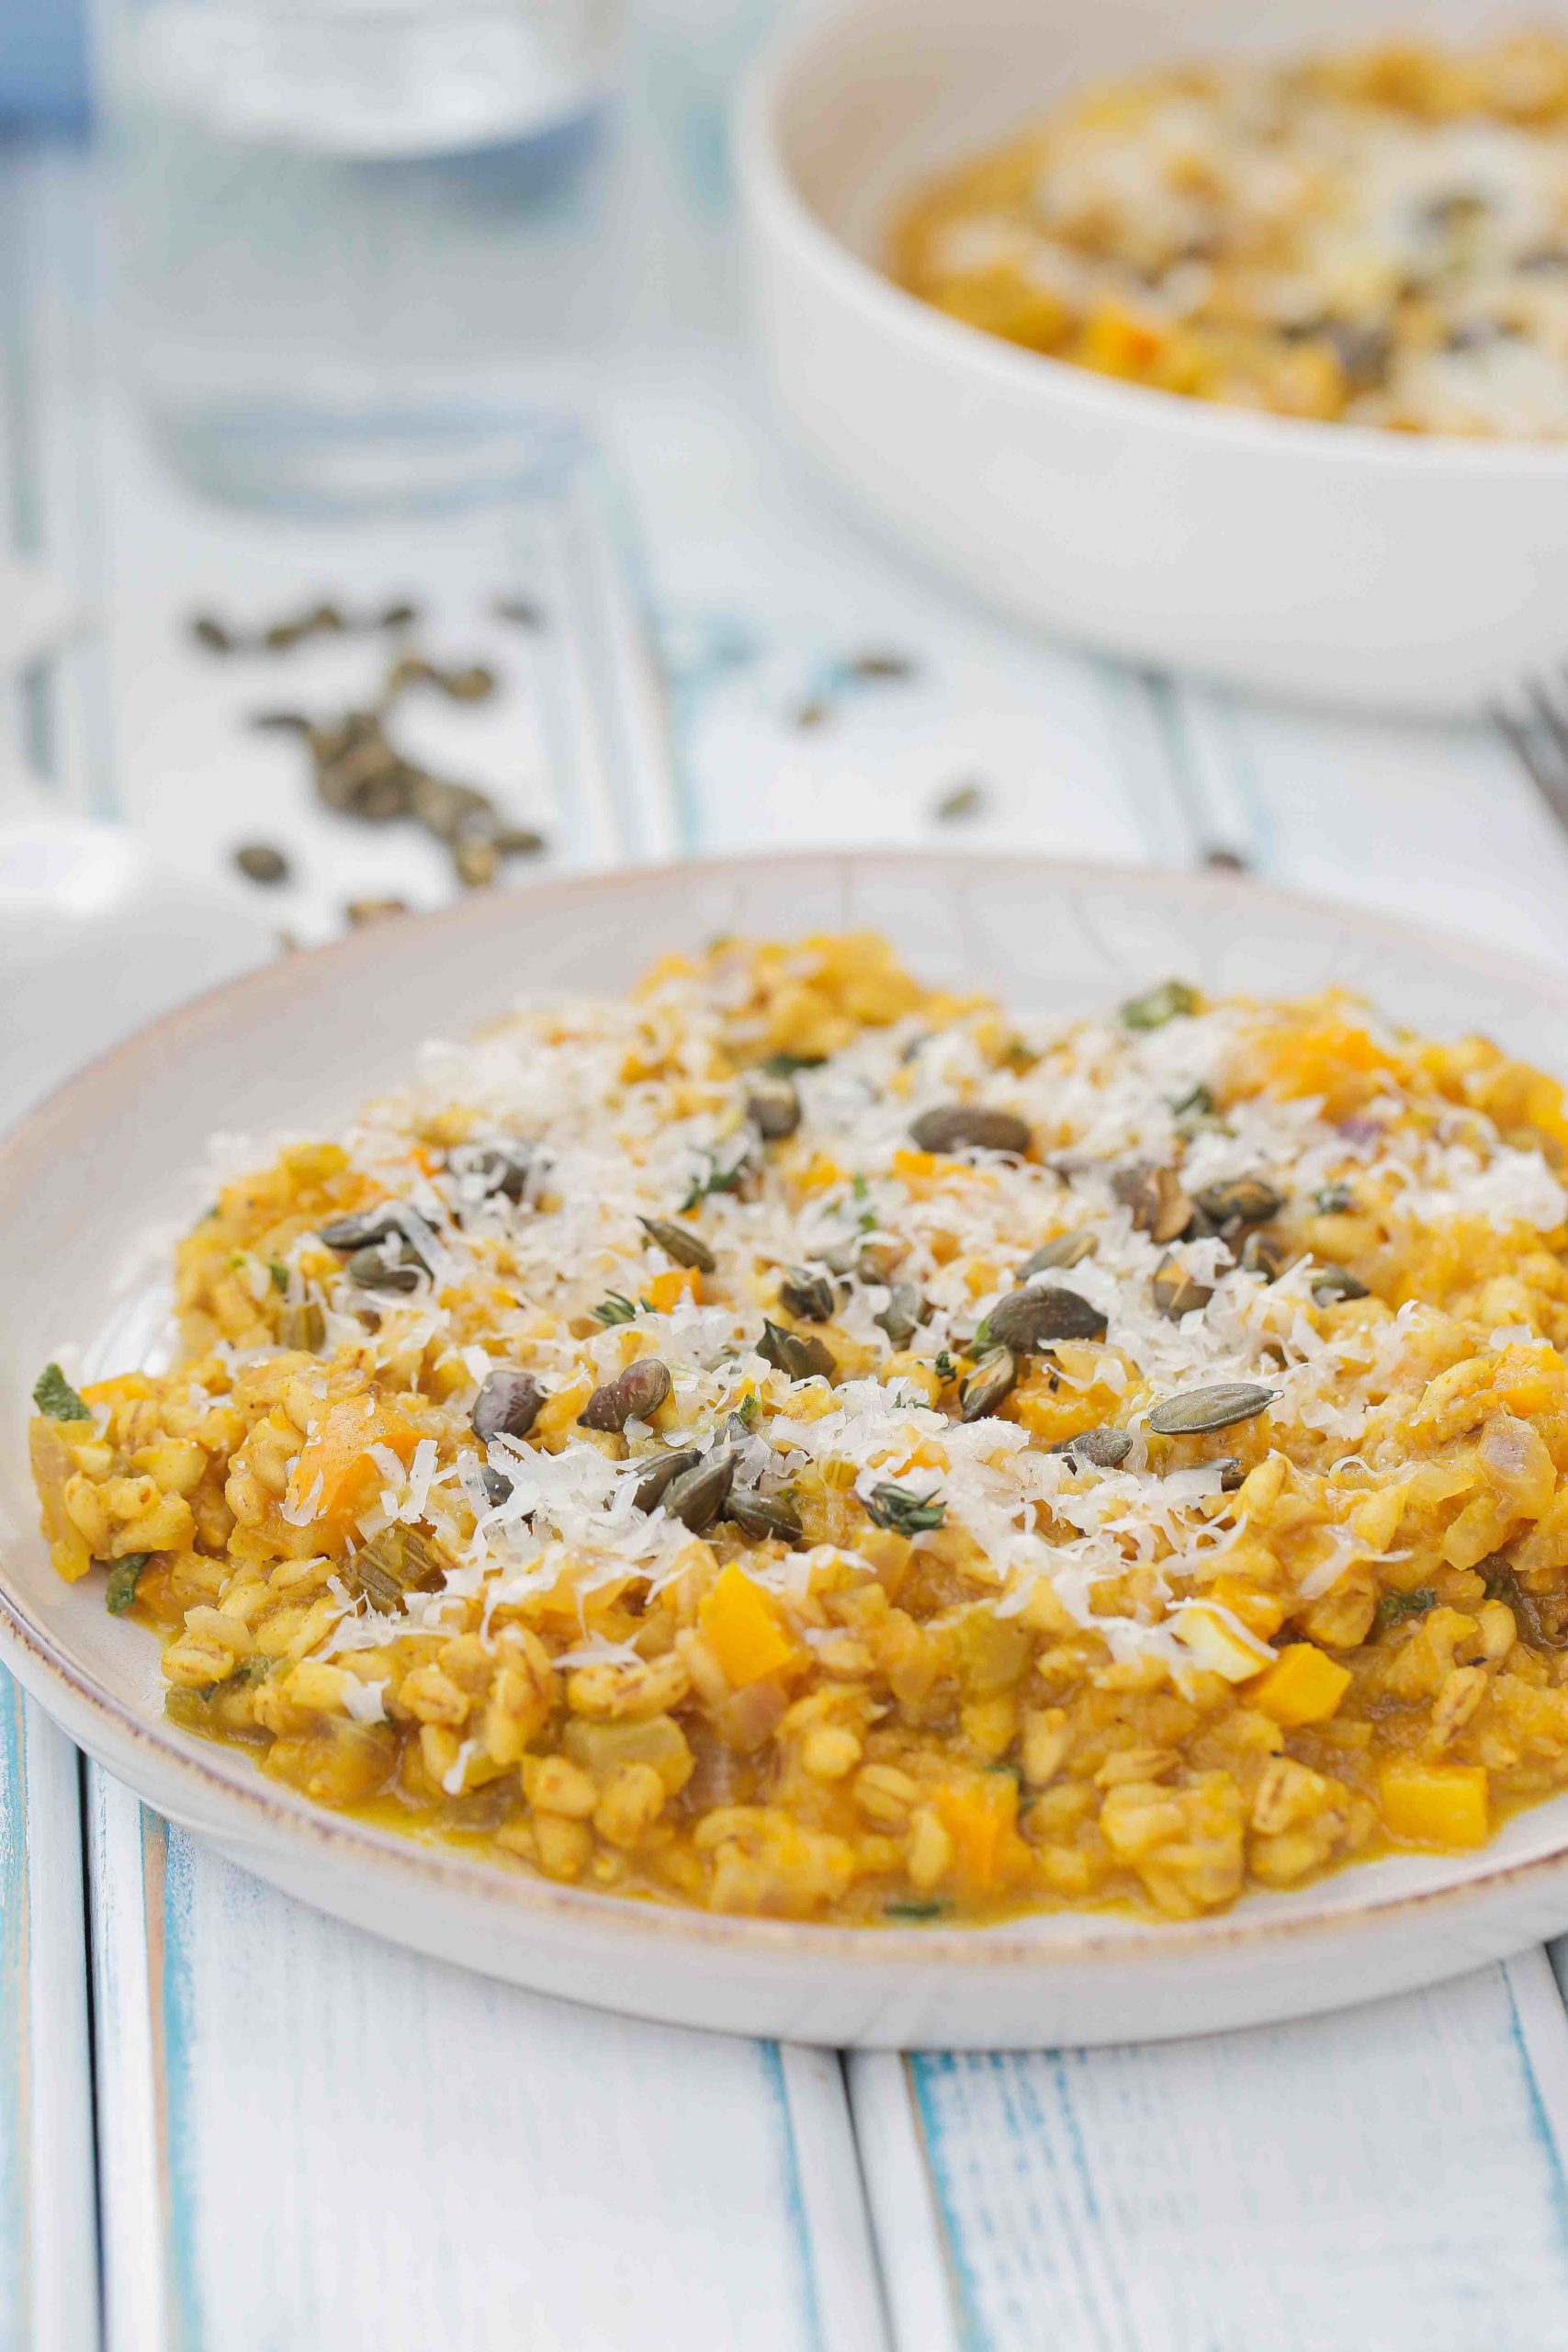 Easy, creamy, one pan pumpkin risotto with white wine, sage and pearl barley. Delicious autumn comfort food. Recipe on thecookandhim.com | #pumpkinrisotto #pearlbarley #vegan #autumnrecipes #comfortfoodrecipes #onepotrecipes #winterwarmerrecipes